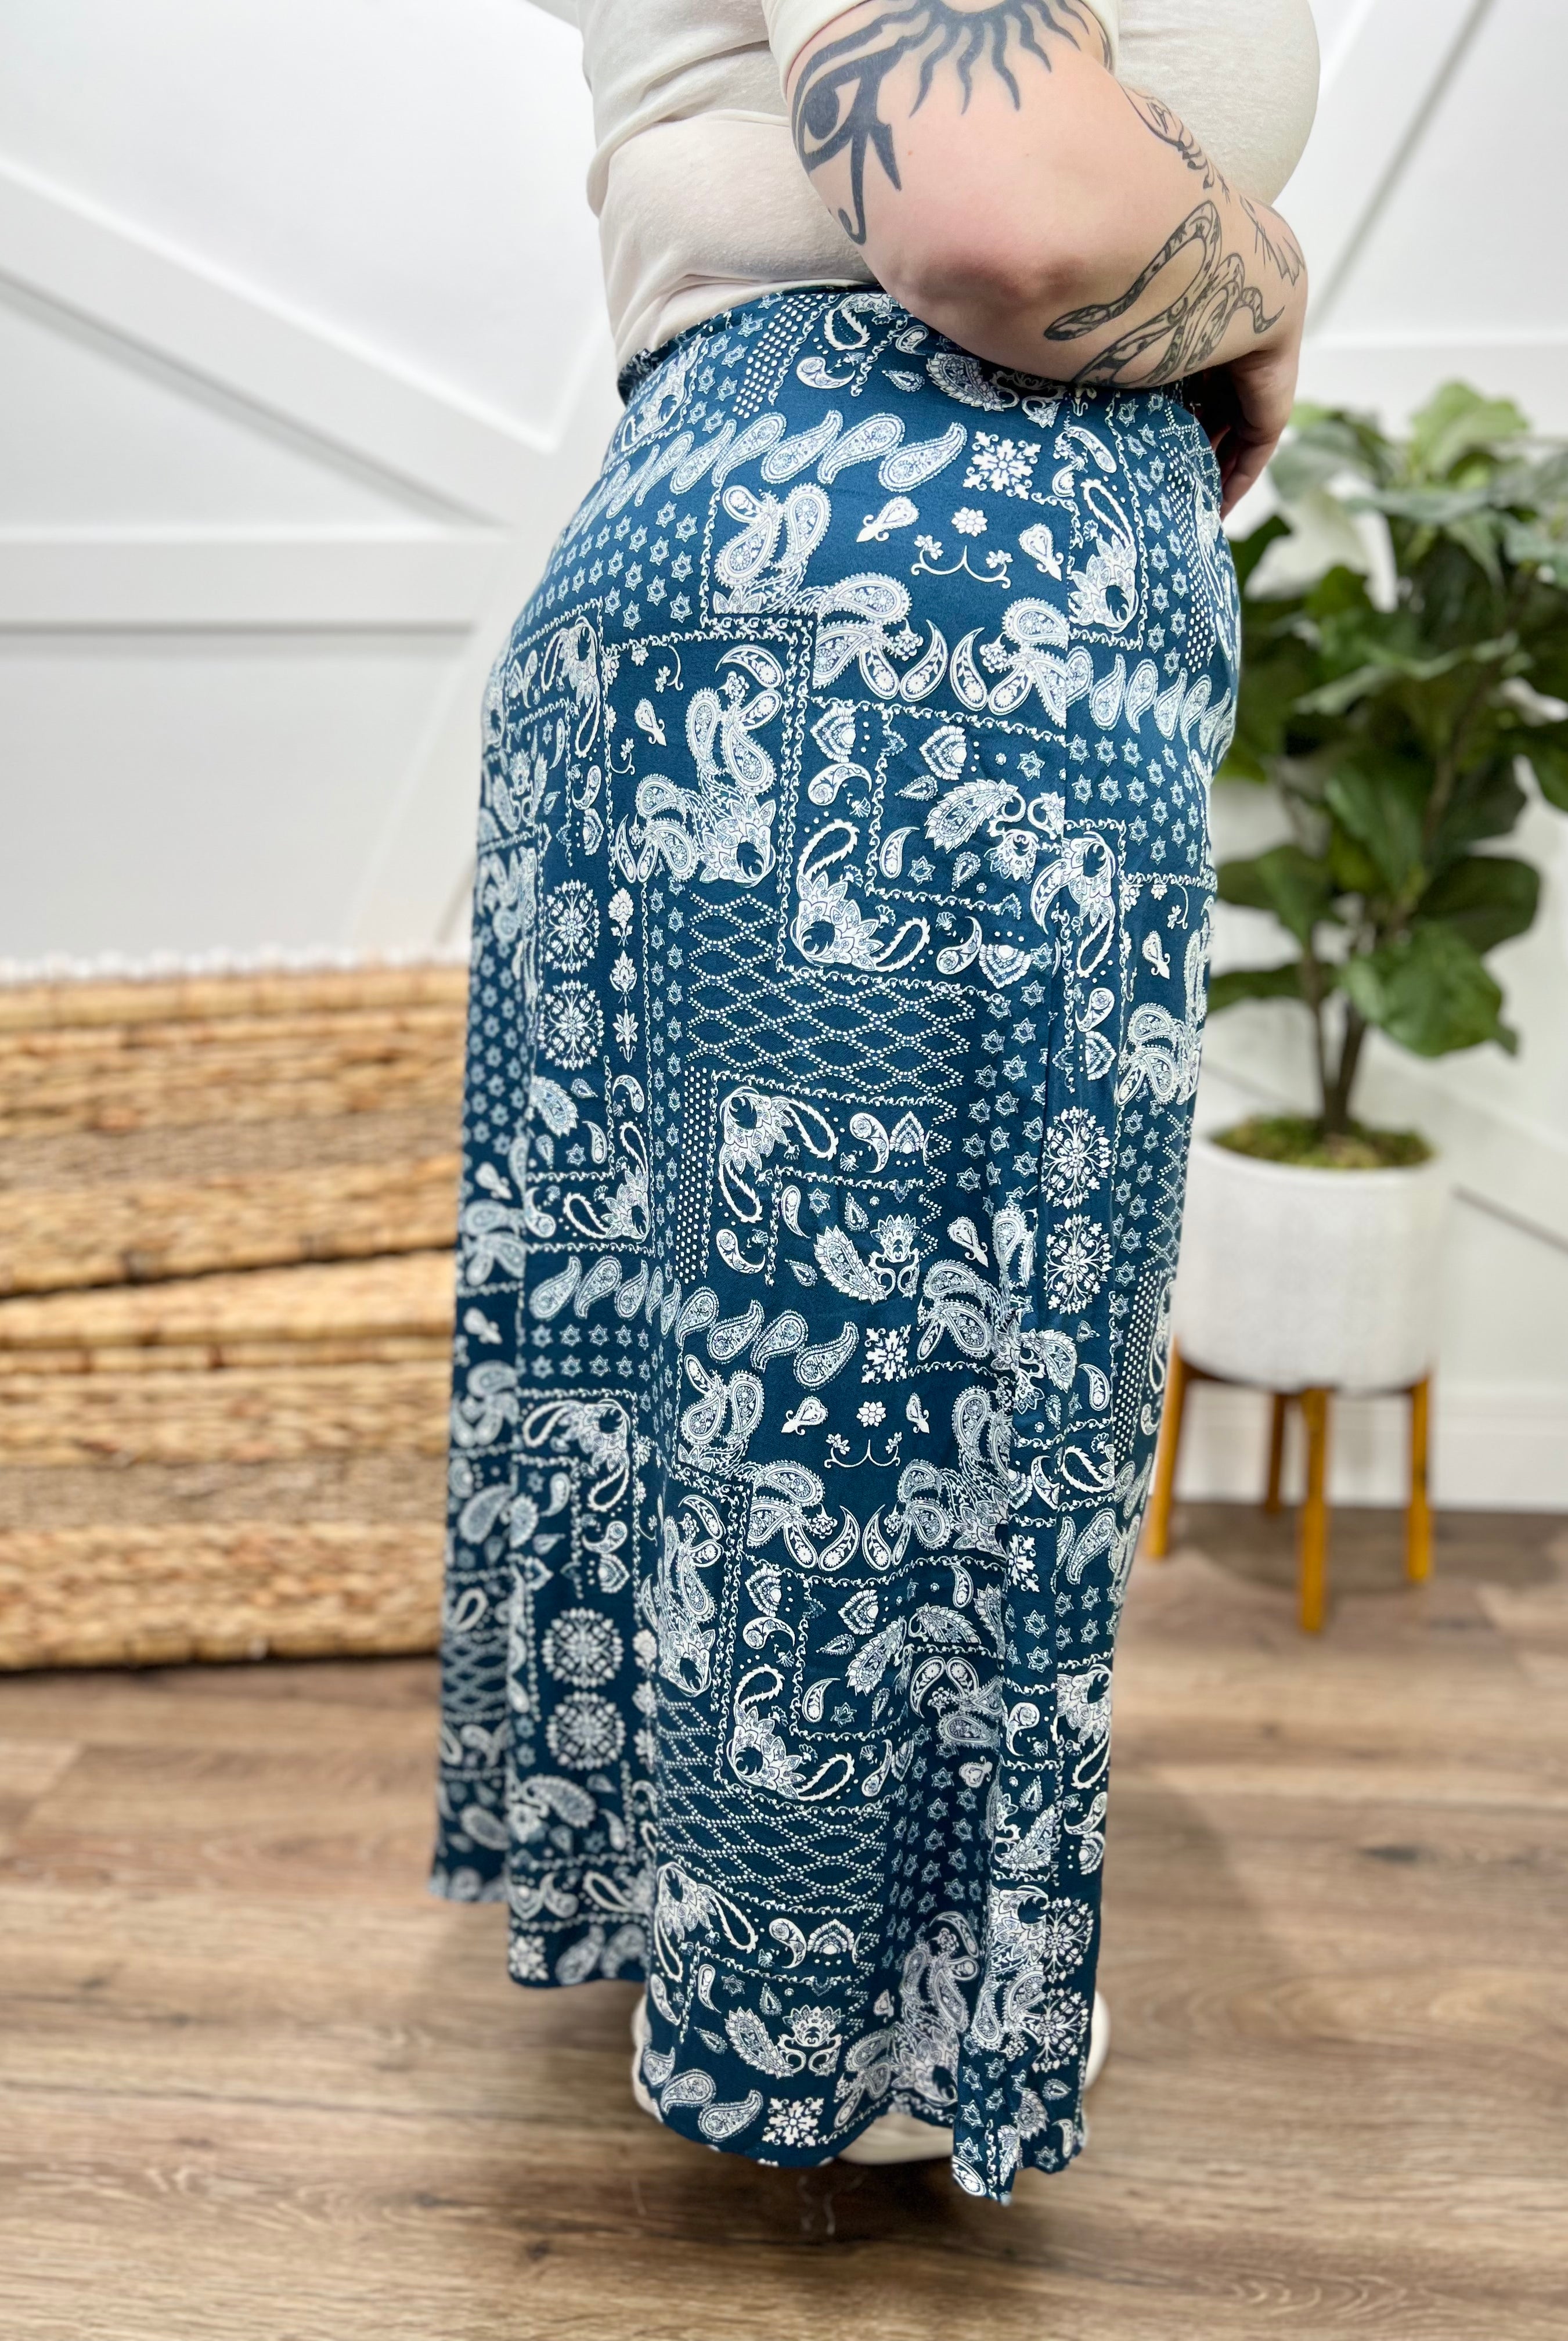 Whirlwind Skirt-170 Skort/ Skirt-P.S. Kate-Heathered Boho Boutique, Women's Fashion and Accessories in Palmetto, FL